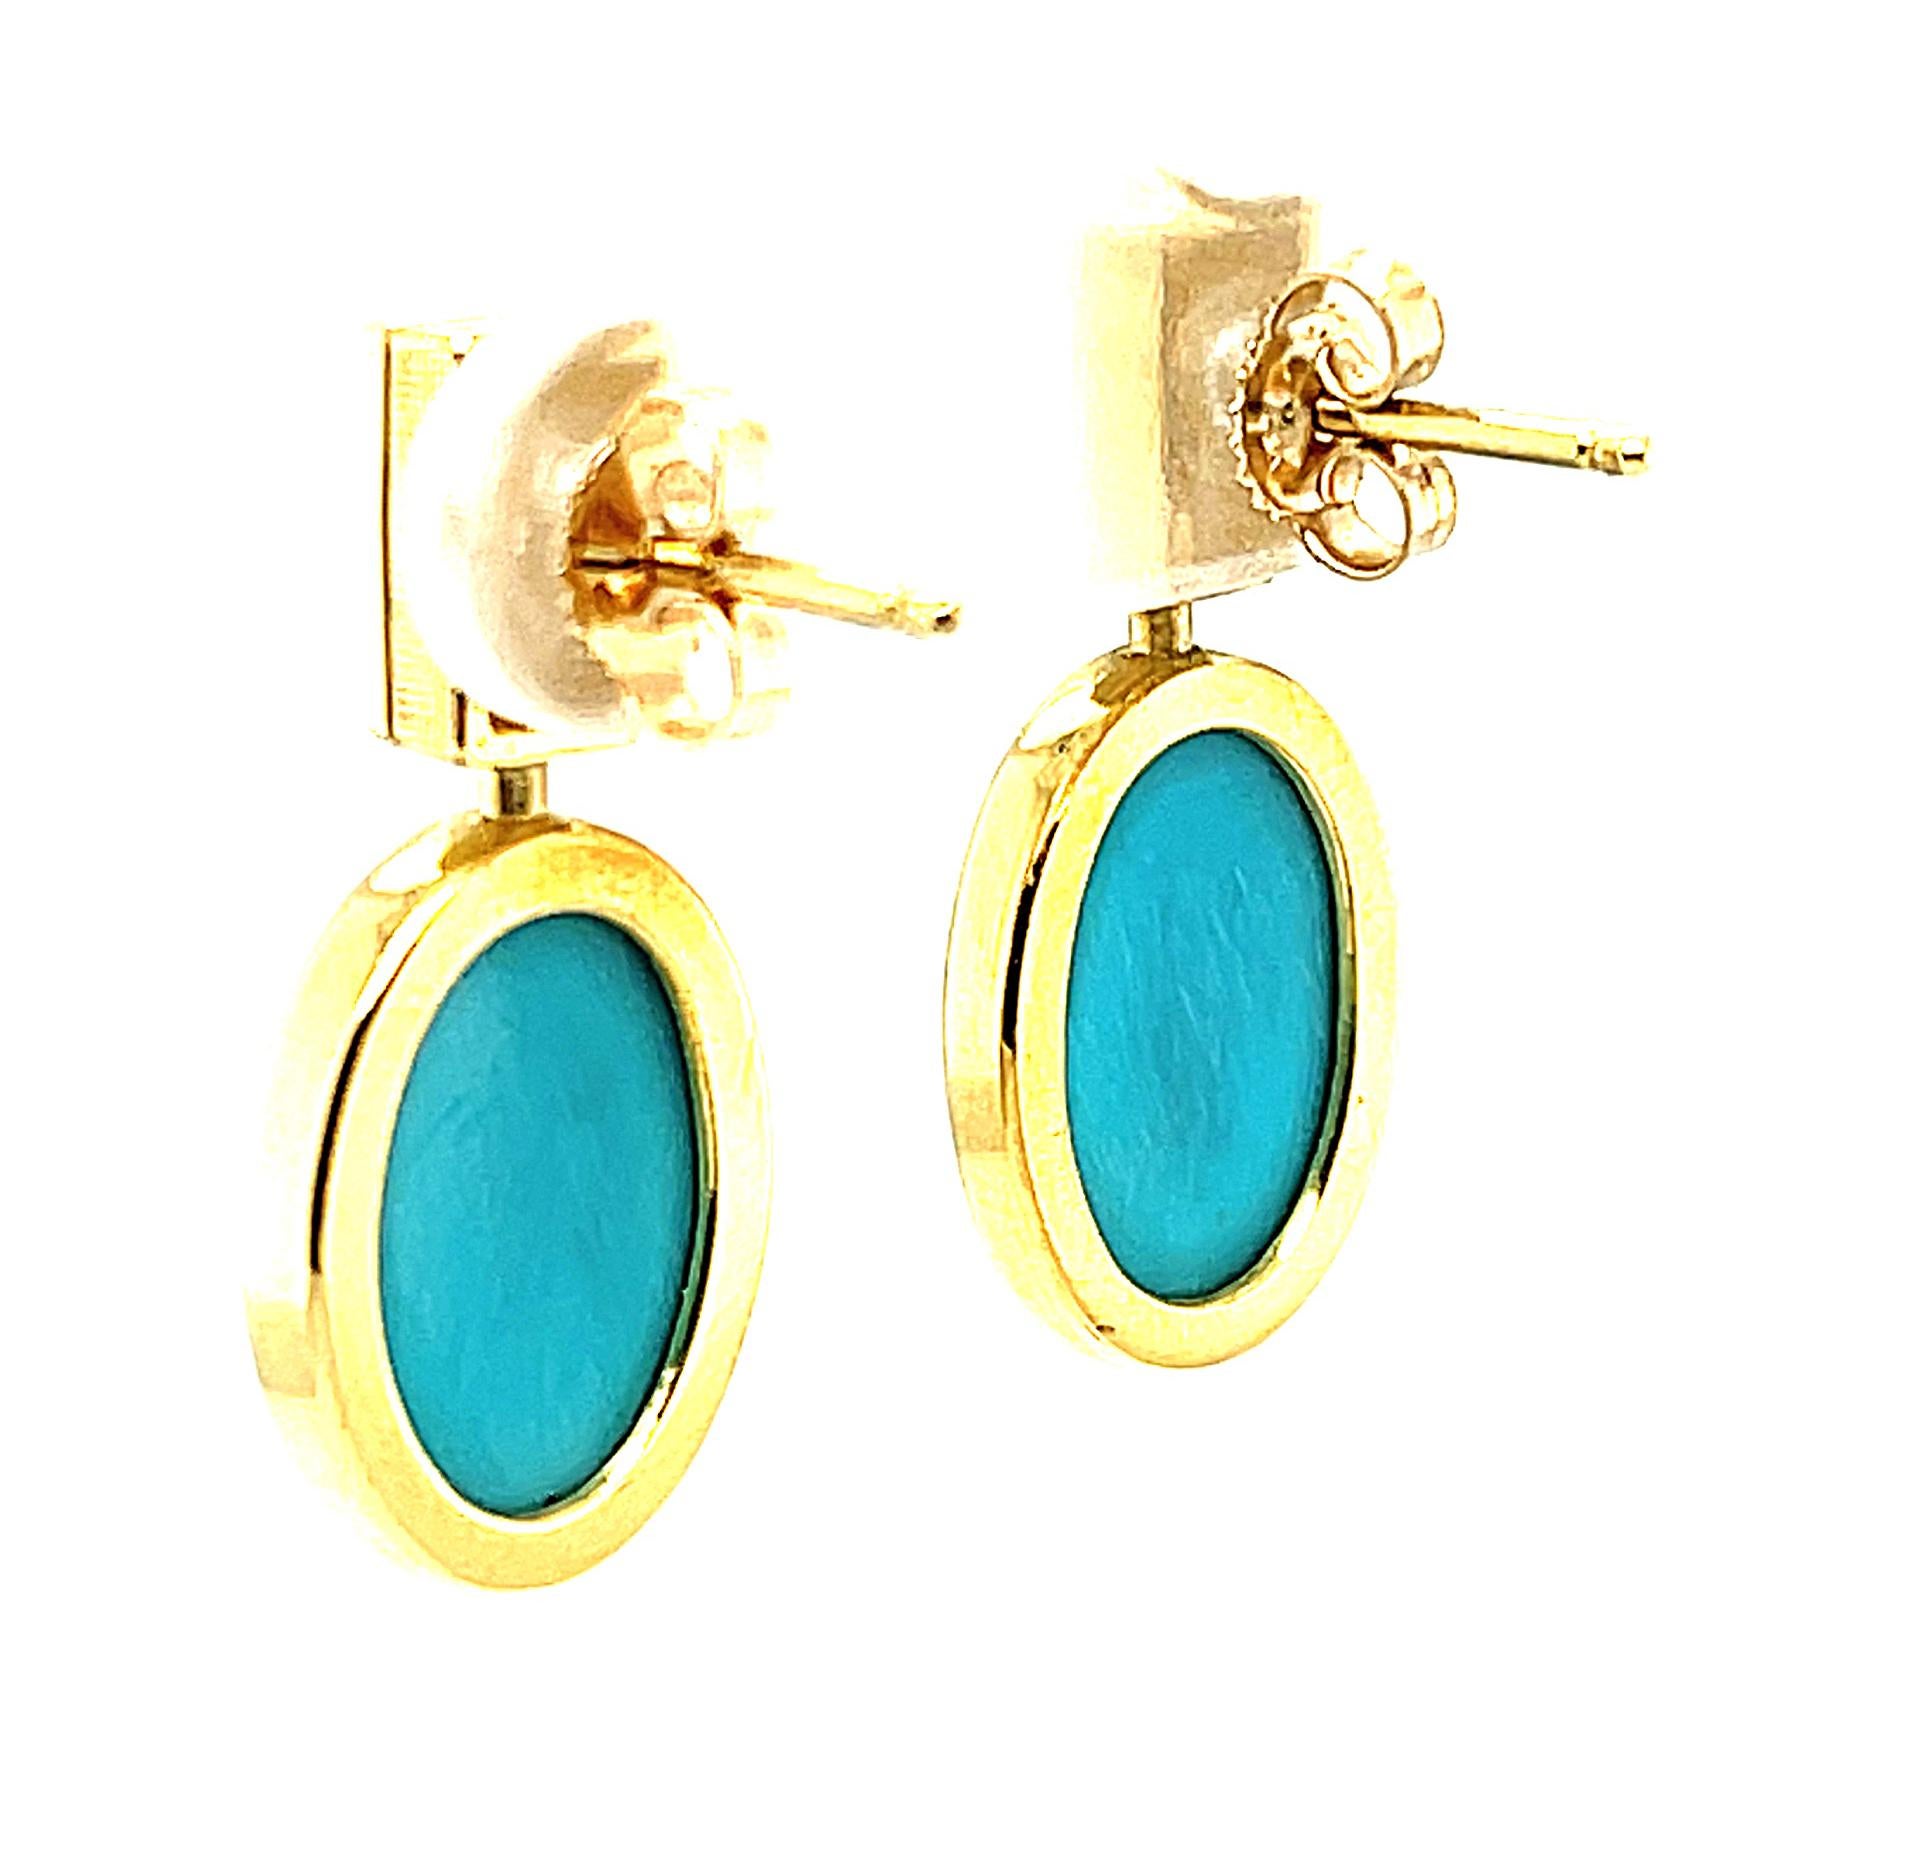 Cabochon Sleeping Beauty Turquoise and Diamond Drop Earrings in 18k Yellow Gold 